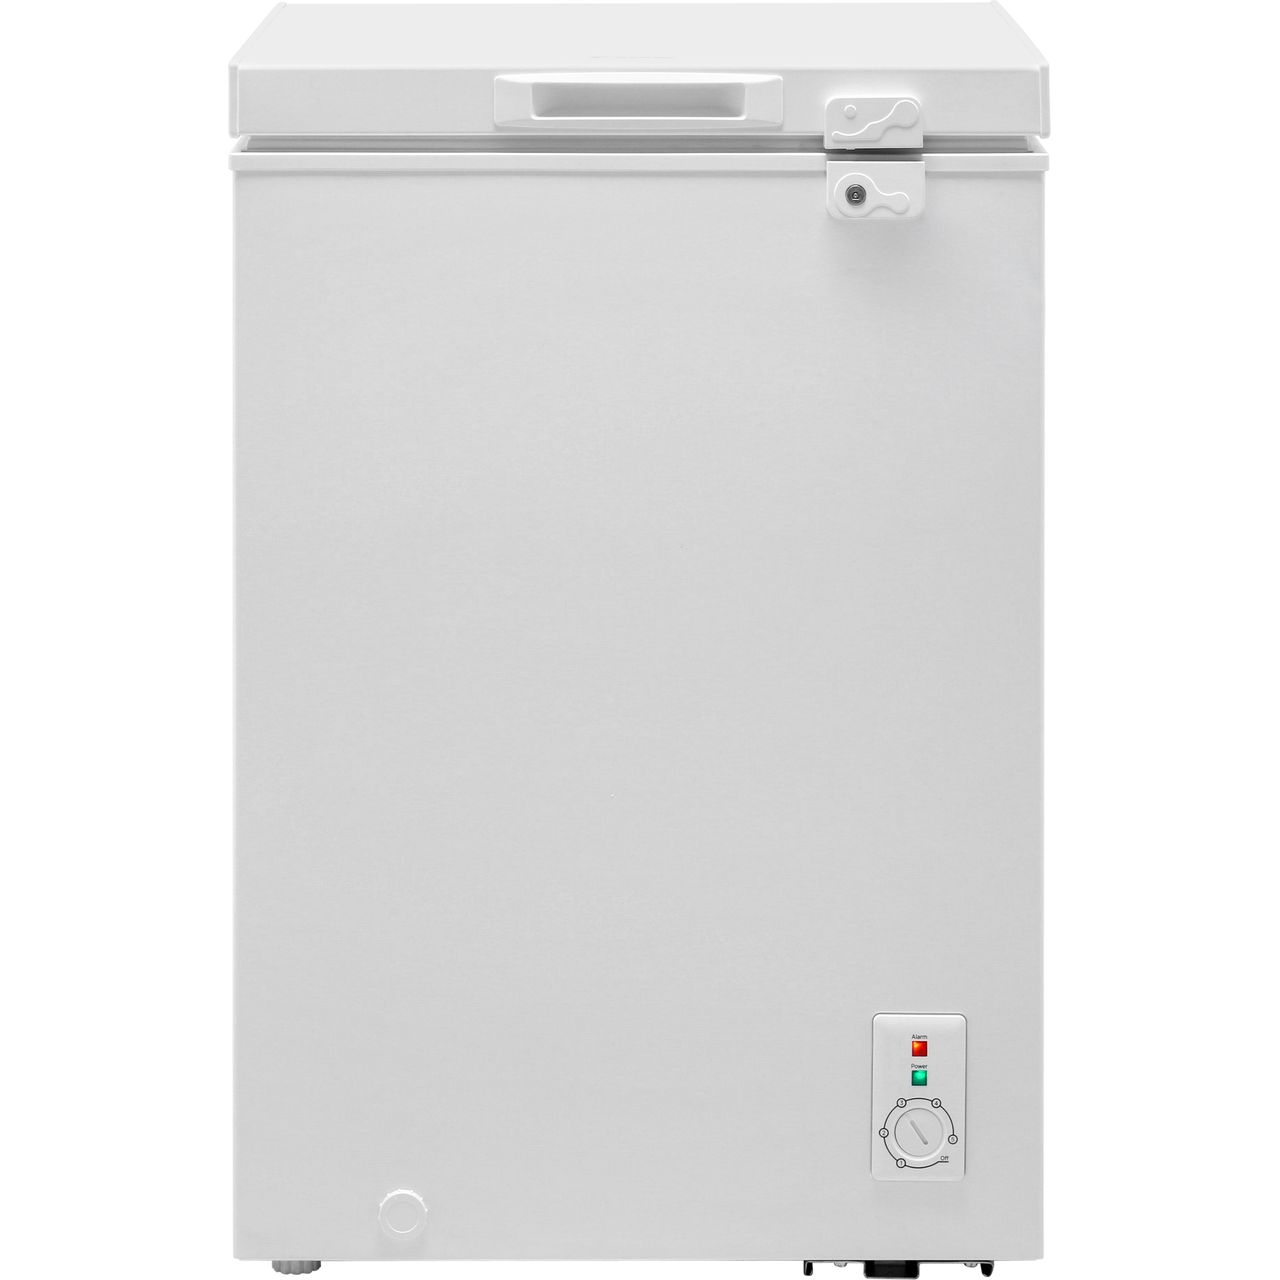 Candy CMCH100UK Chest Freezer Review